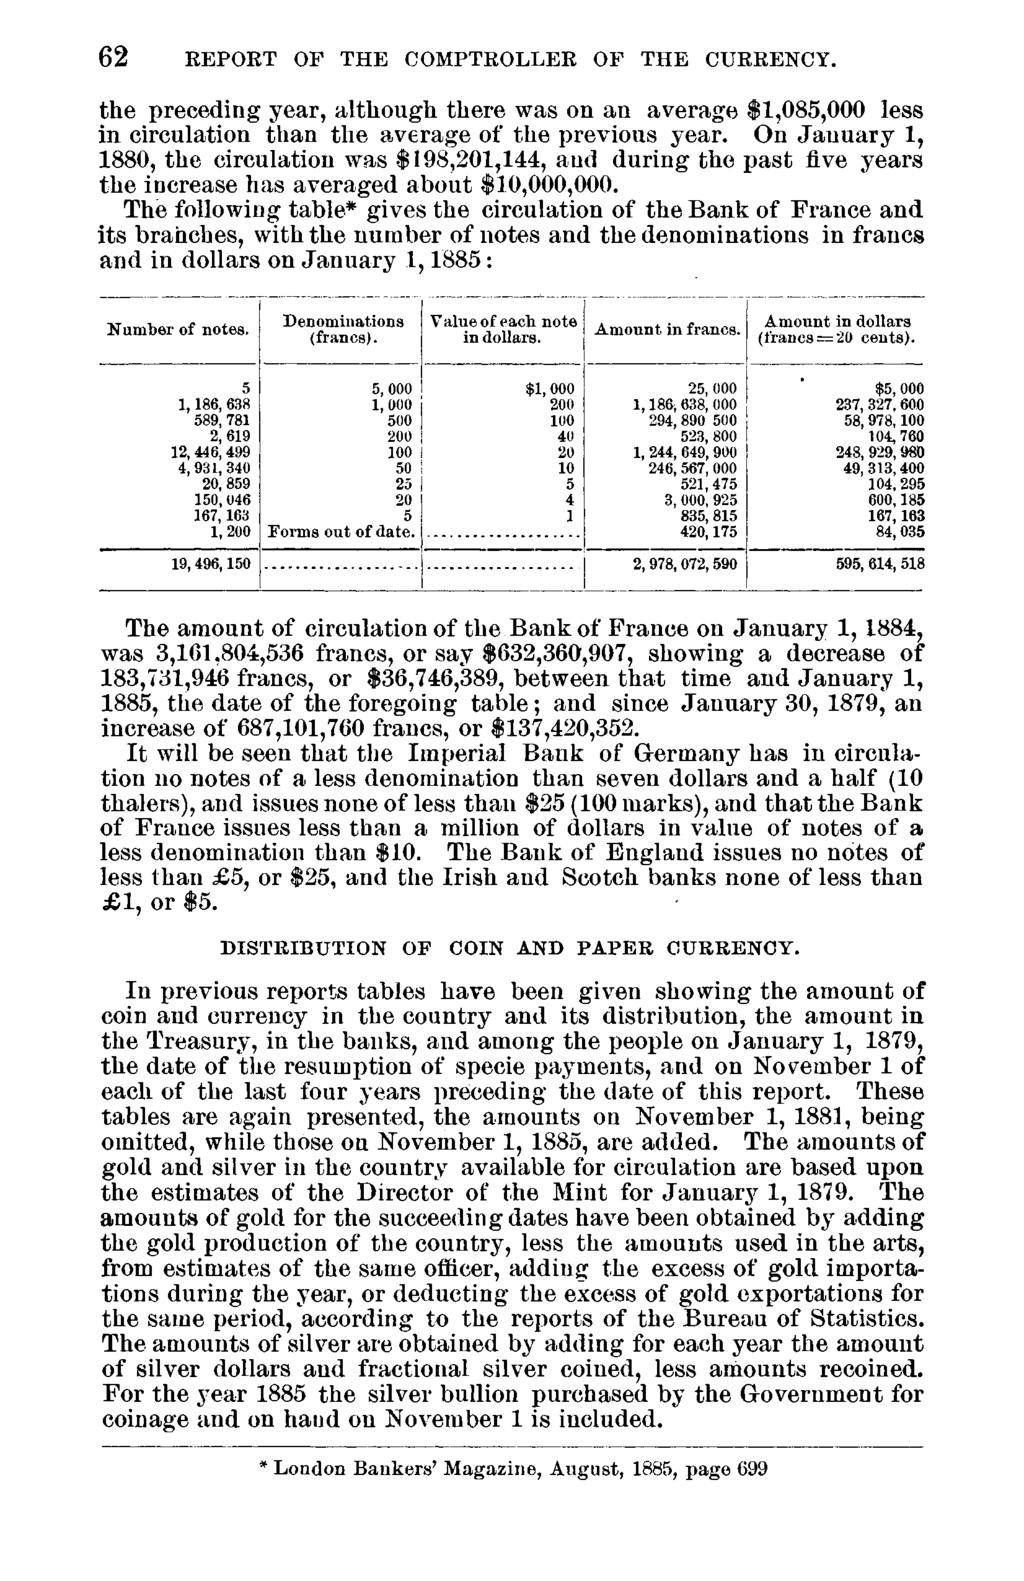 62 REPORT OF THE COMPTROLLER OF THE CURRENCY. the preceding year, although there was on an average $1,085,0 less in circulation than the average of the previous year.